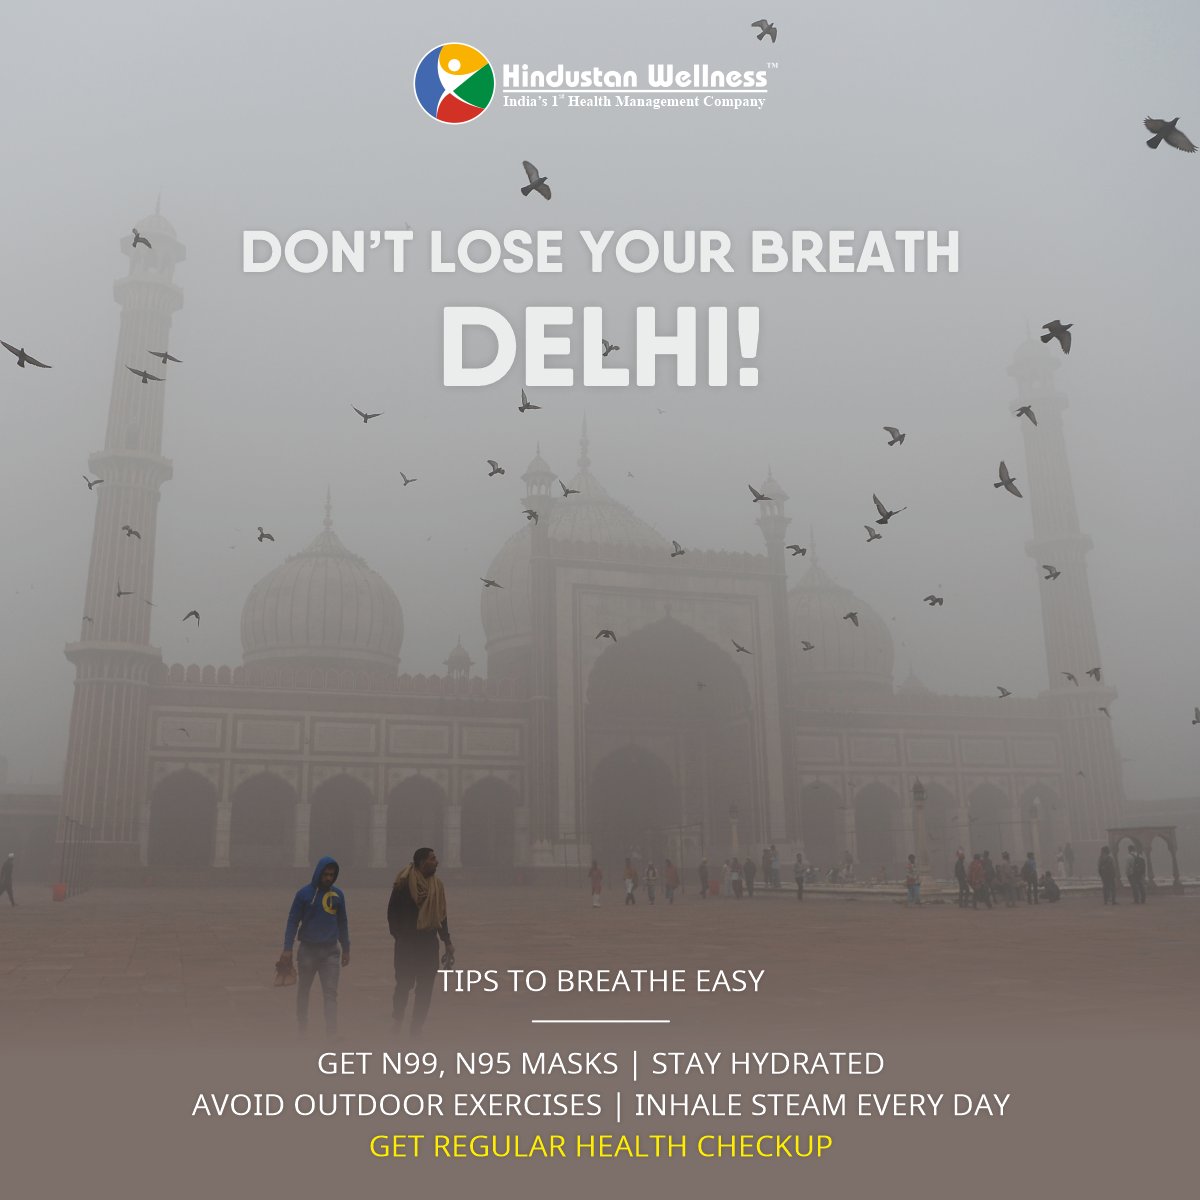 Delhi air quality at a hazardous level & slowly turning into a gas chamber. Follow these steps to safeguard yourself.
#AirPollutionTips #HealthTips #HindustanWellness